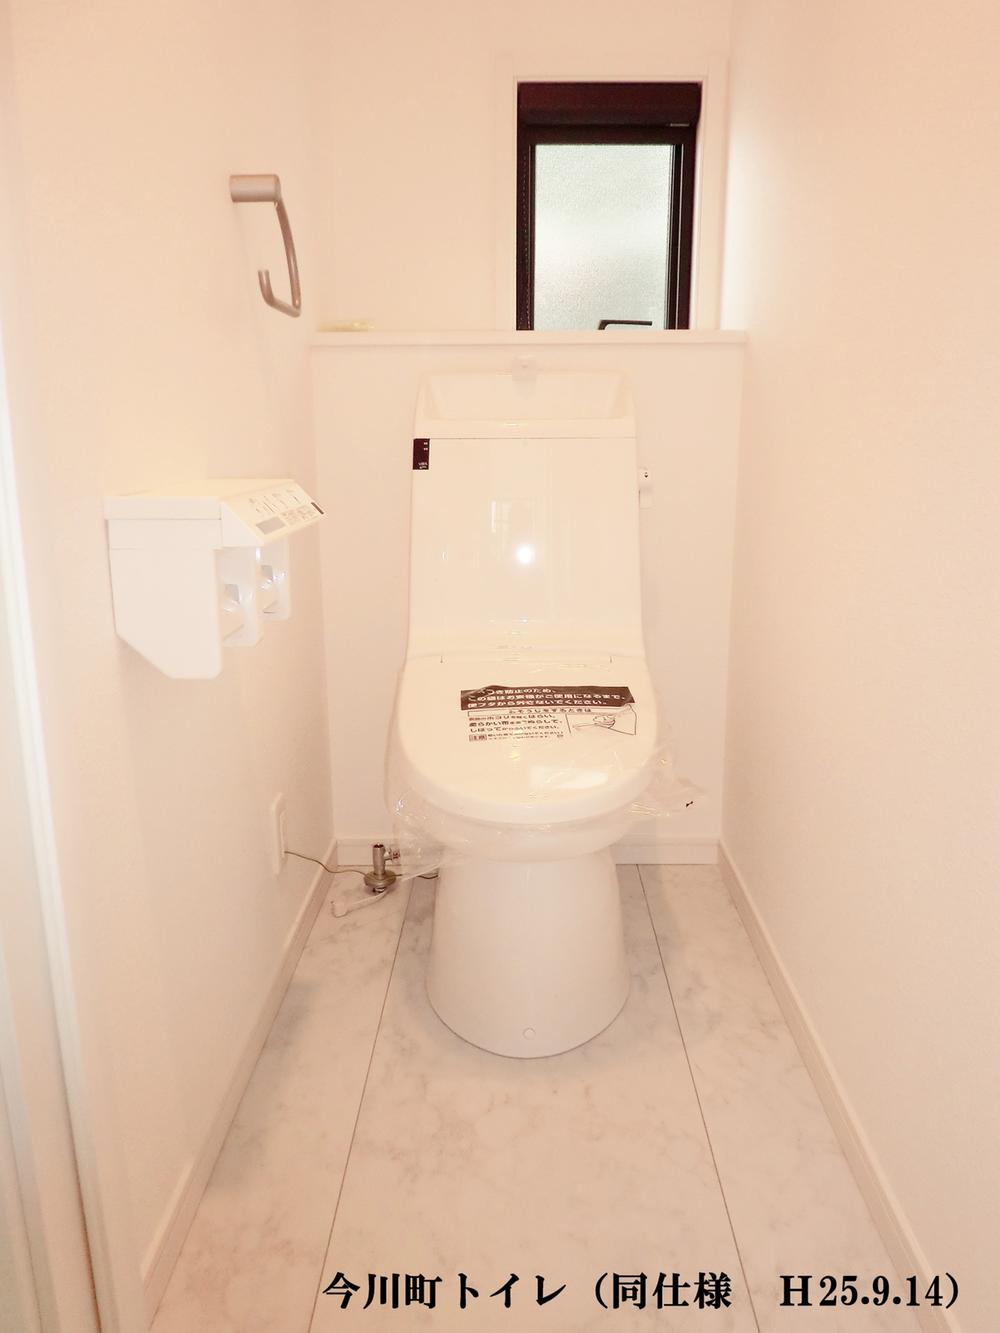 Toilet. Warm water cleaning toilet seat with the remote control is super water-saving eco-toilet